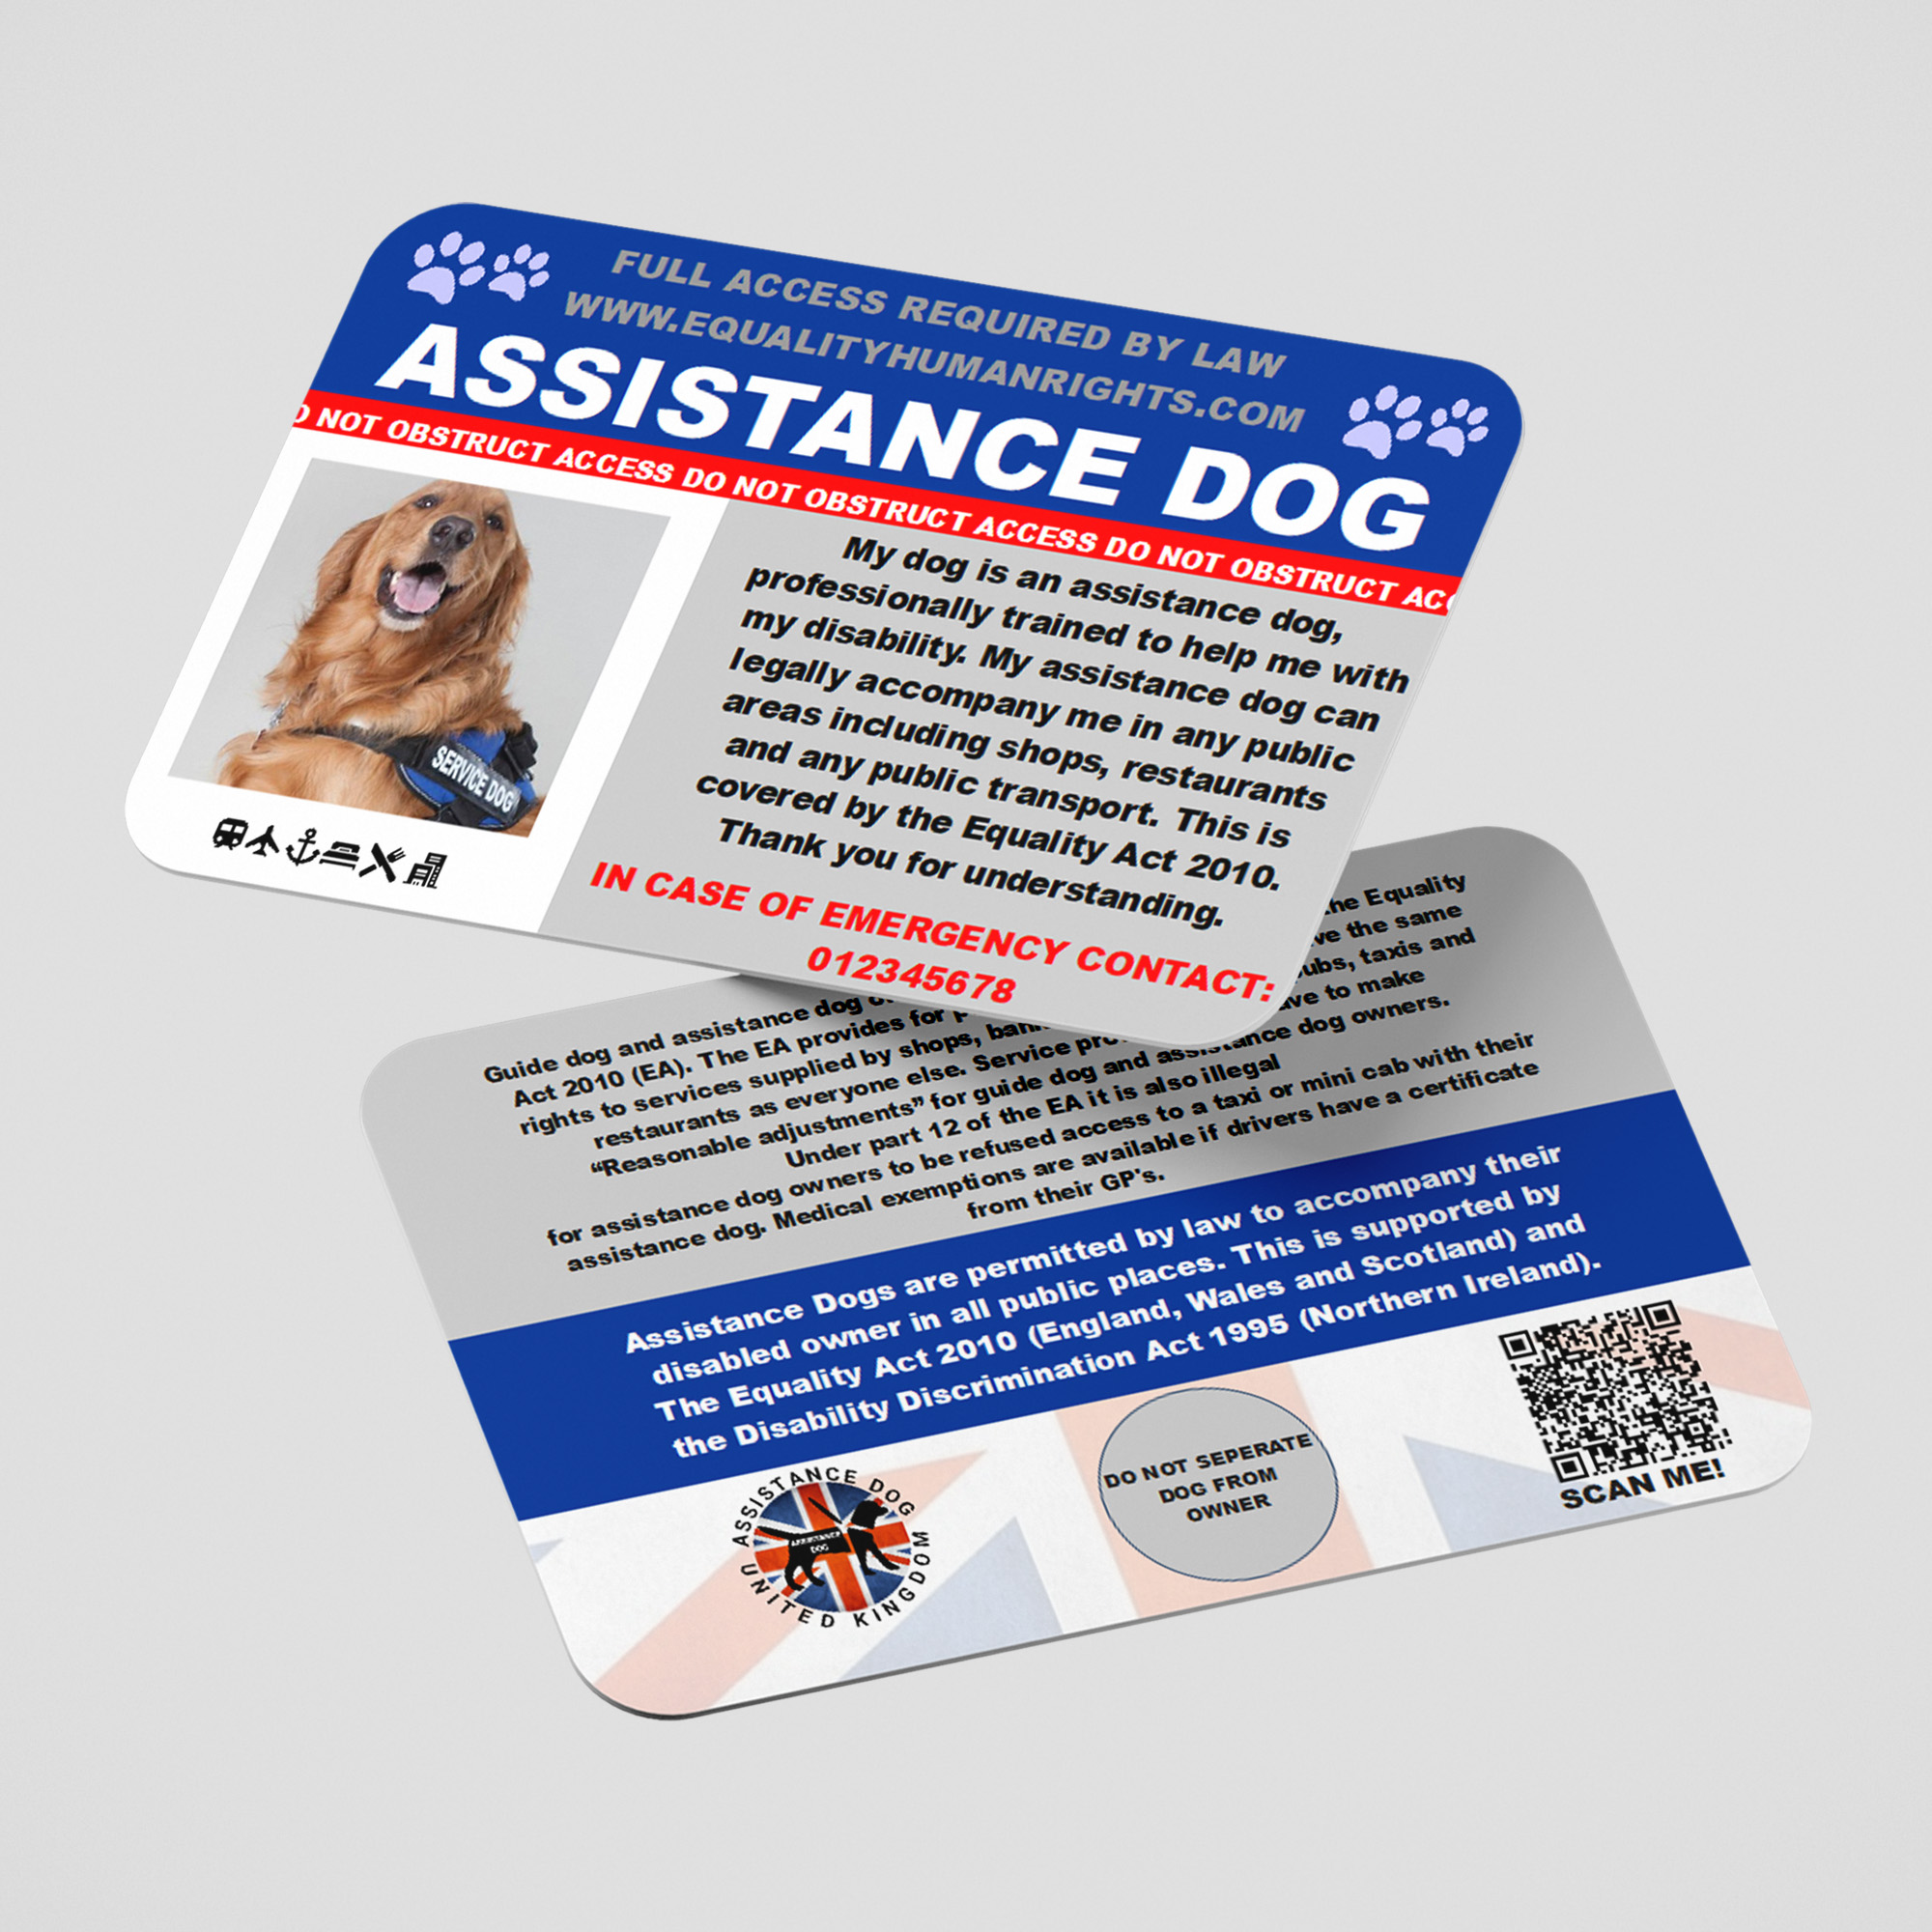 Assistance Dog Card AD28